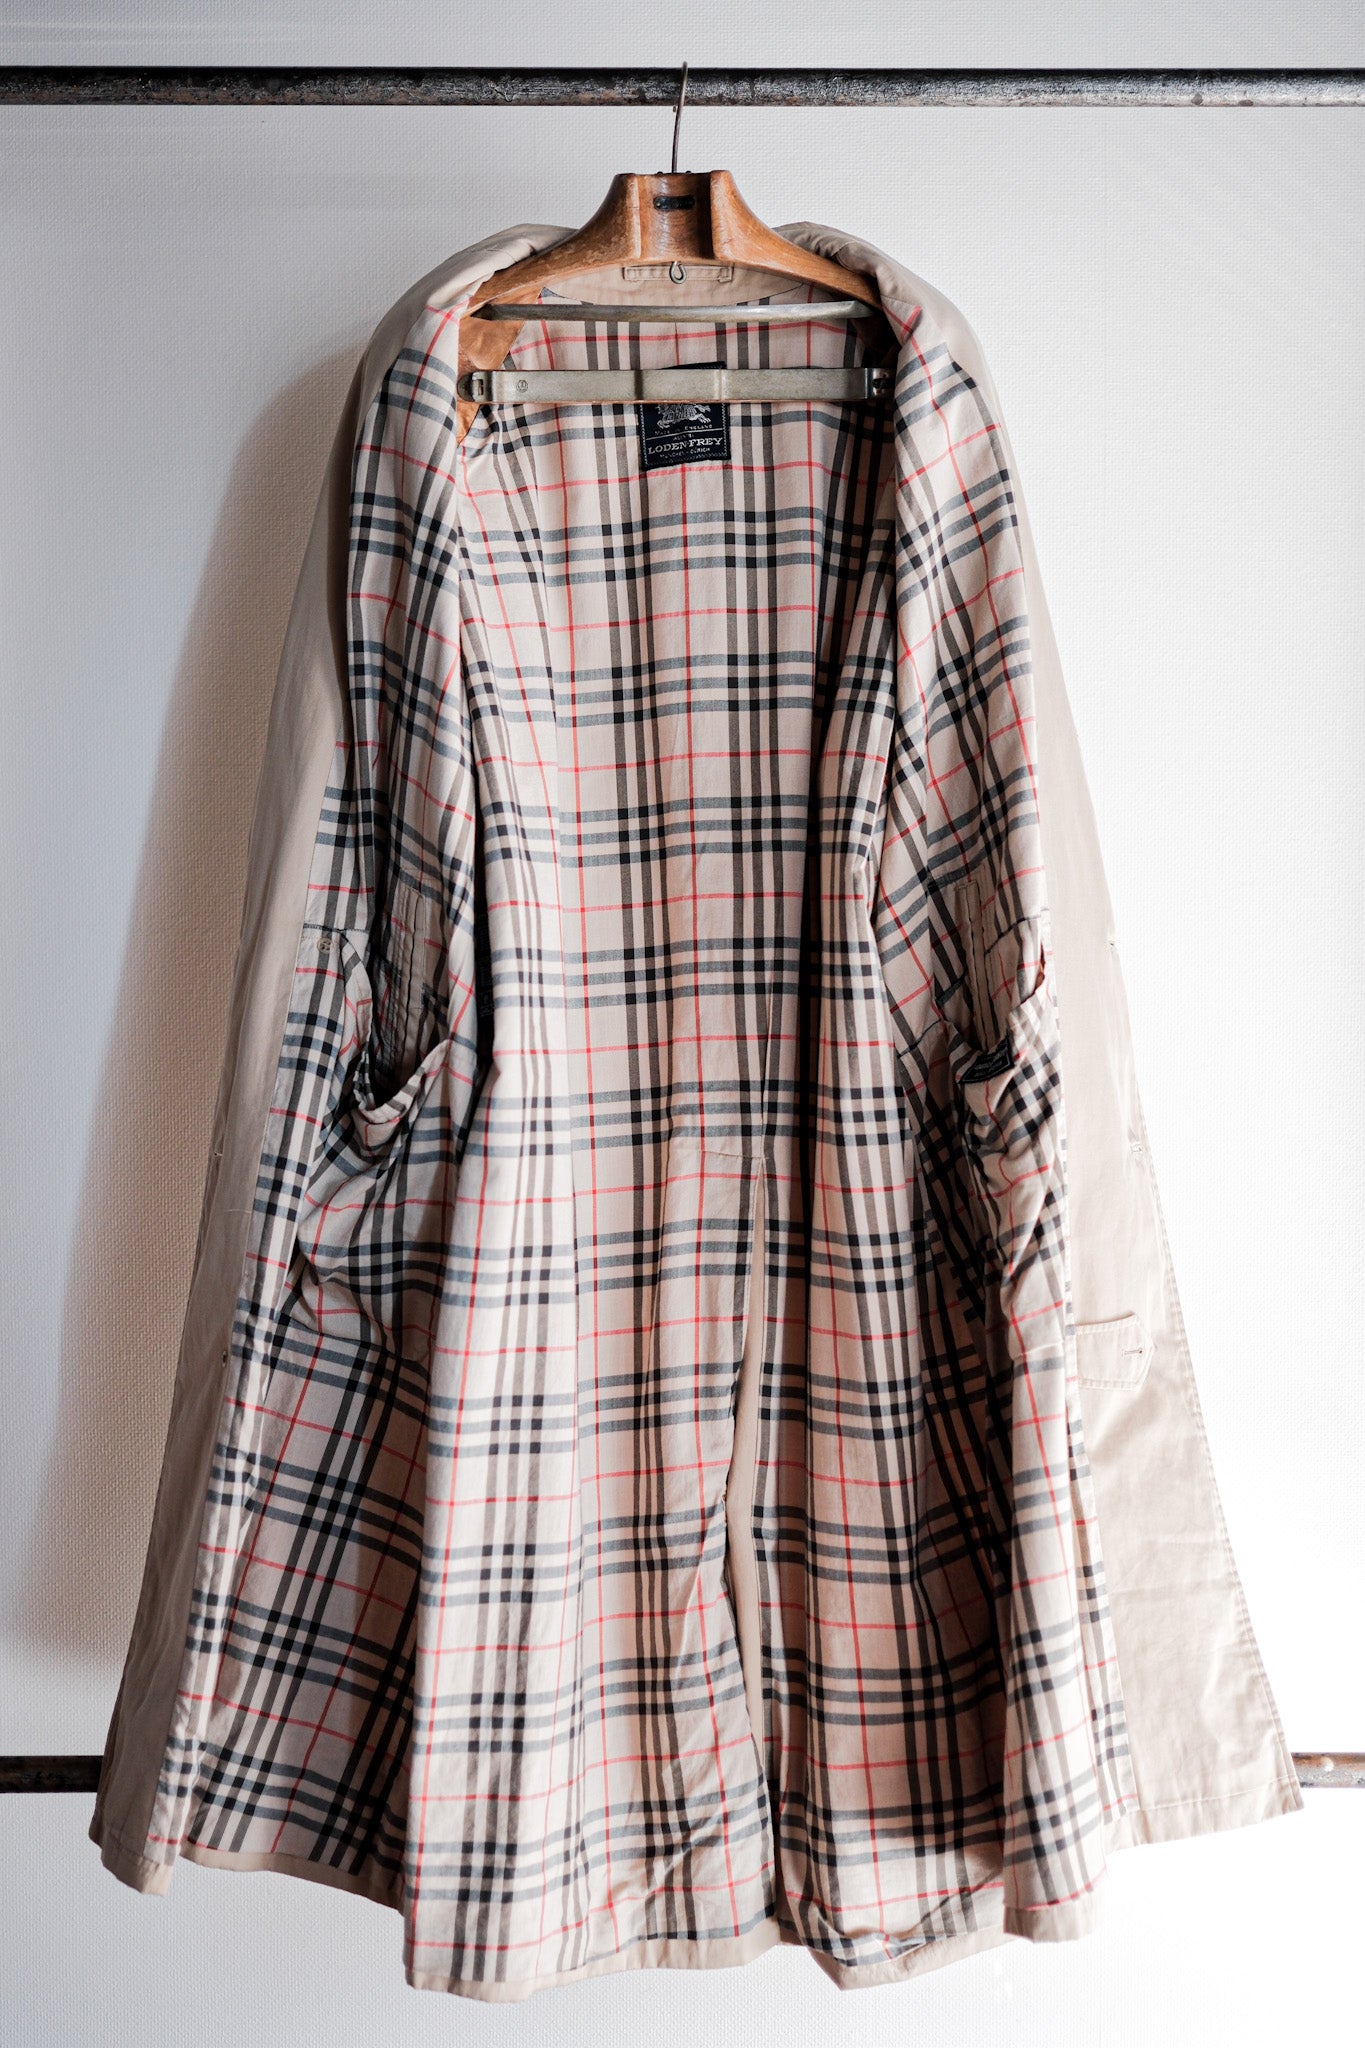 【~70's】Vintage Burberry's Single Raglan Double Breasted Coat "LODEN-FREY 別注"